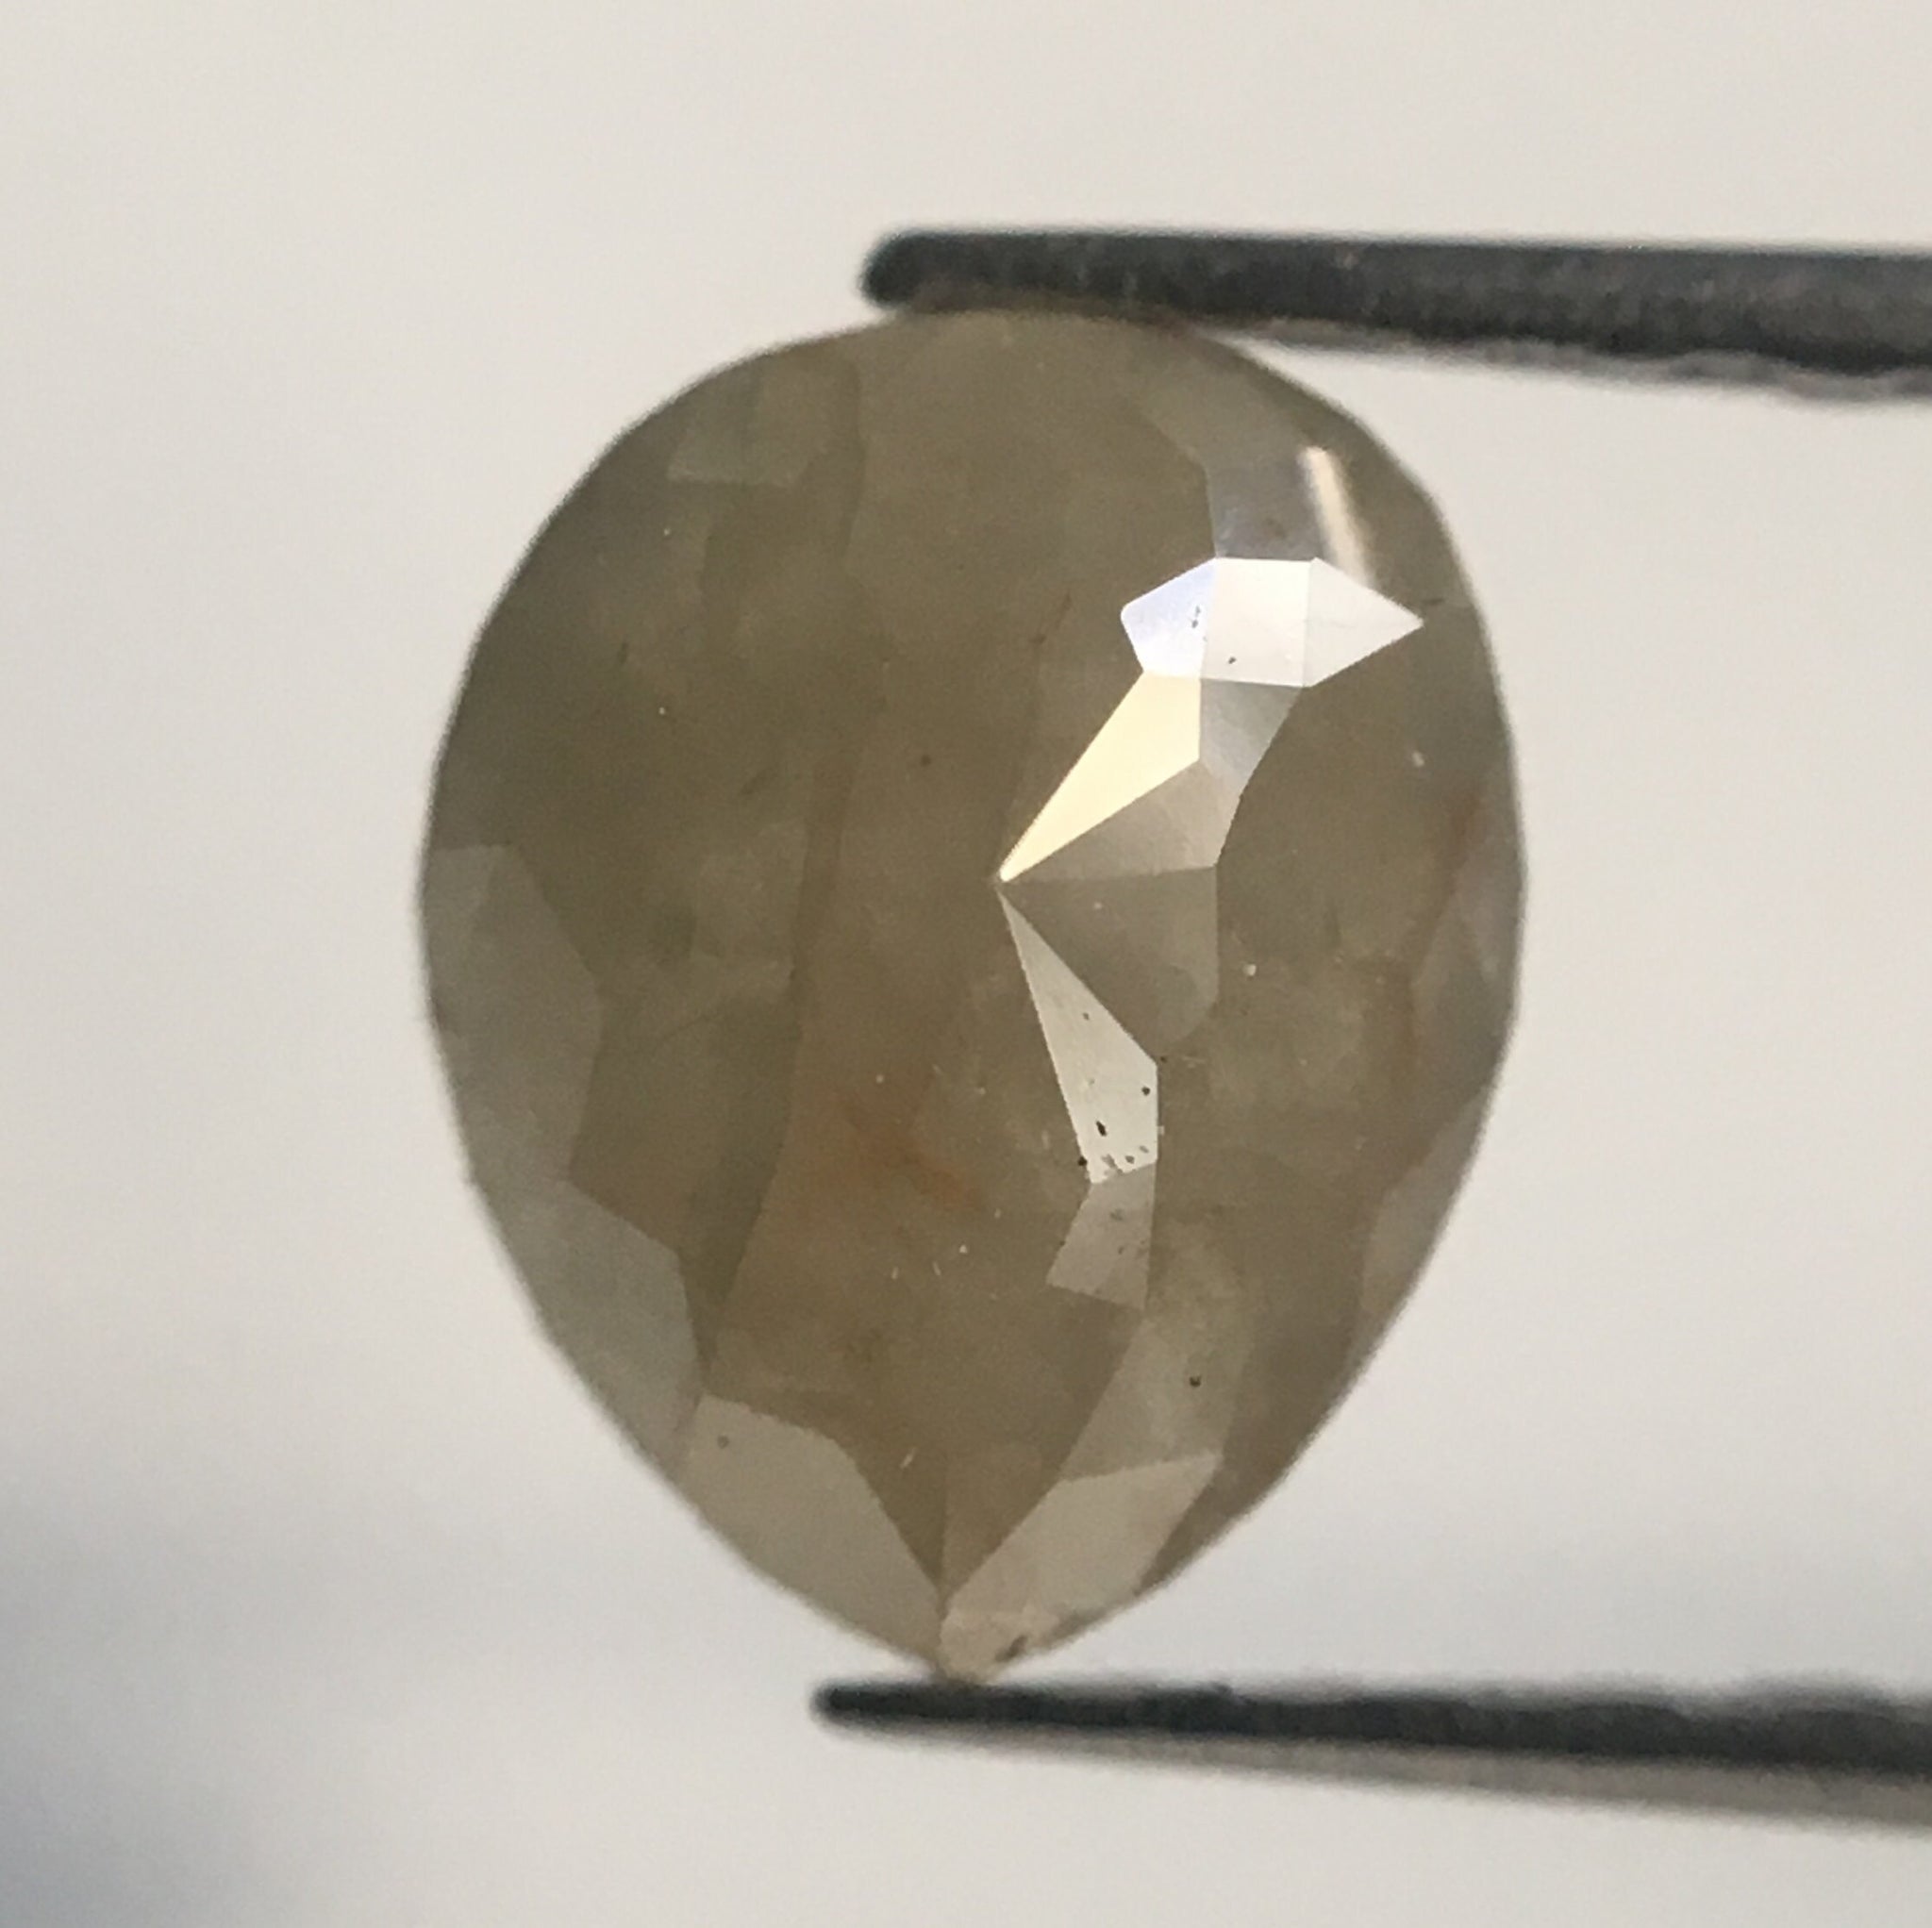 0.95 Ct Gray Color Pear Shape Natural Loose Diamond, 7.28 mm X 5.96 mm X 2.61 mm Grey Color Natural Loose Diamond Use for Jewelry AJ12/49